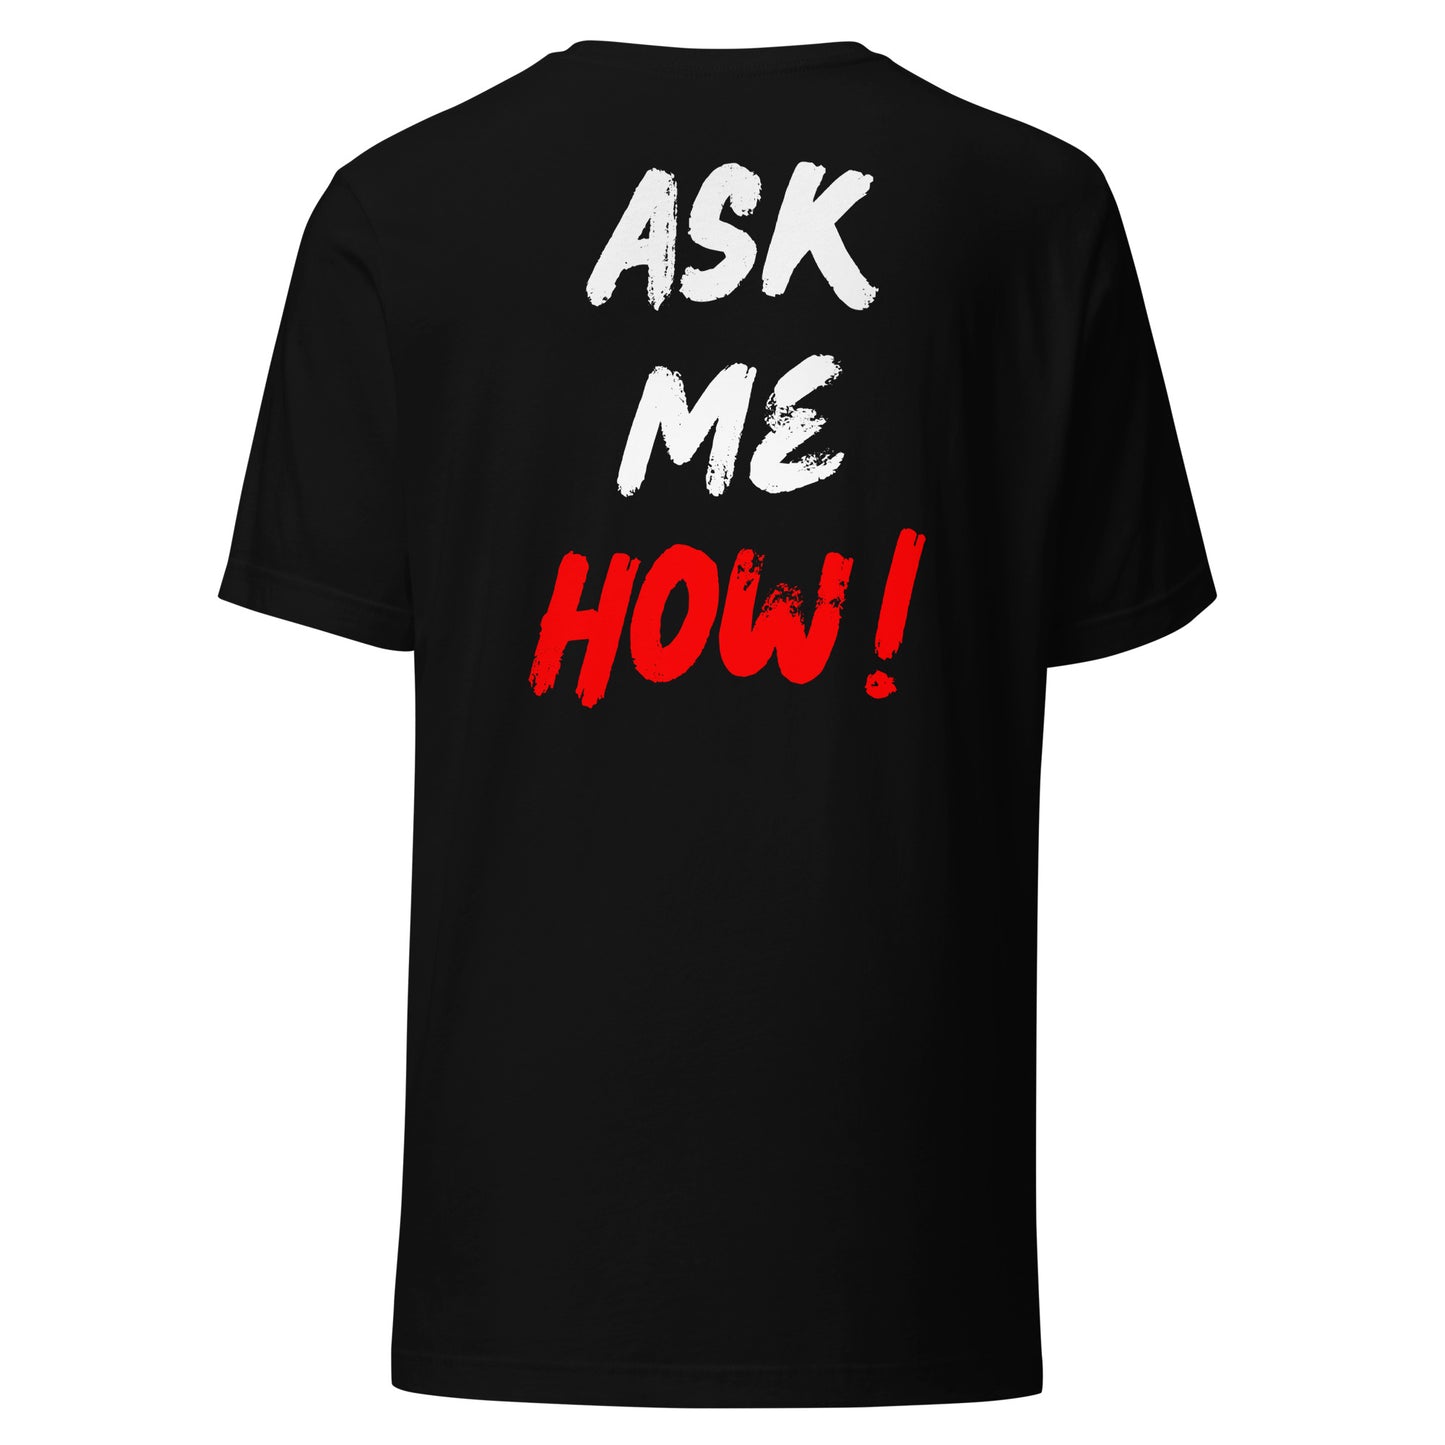 ASK ME (BLACK & RED)